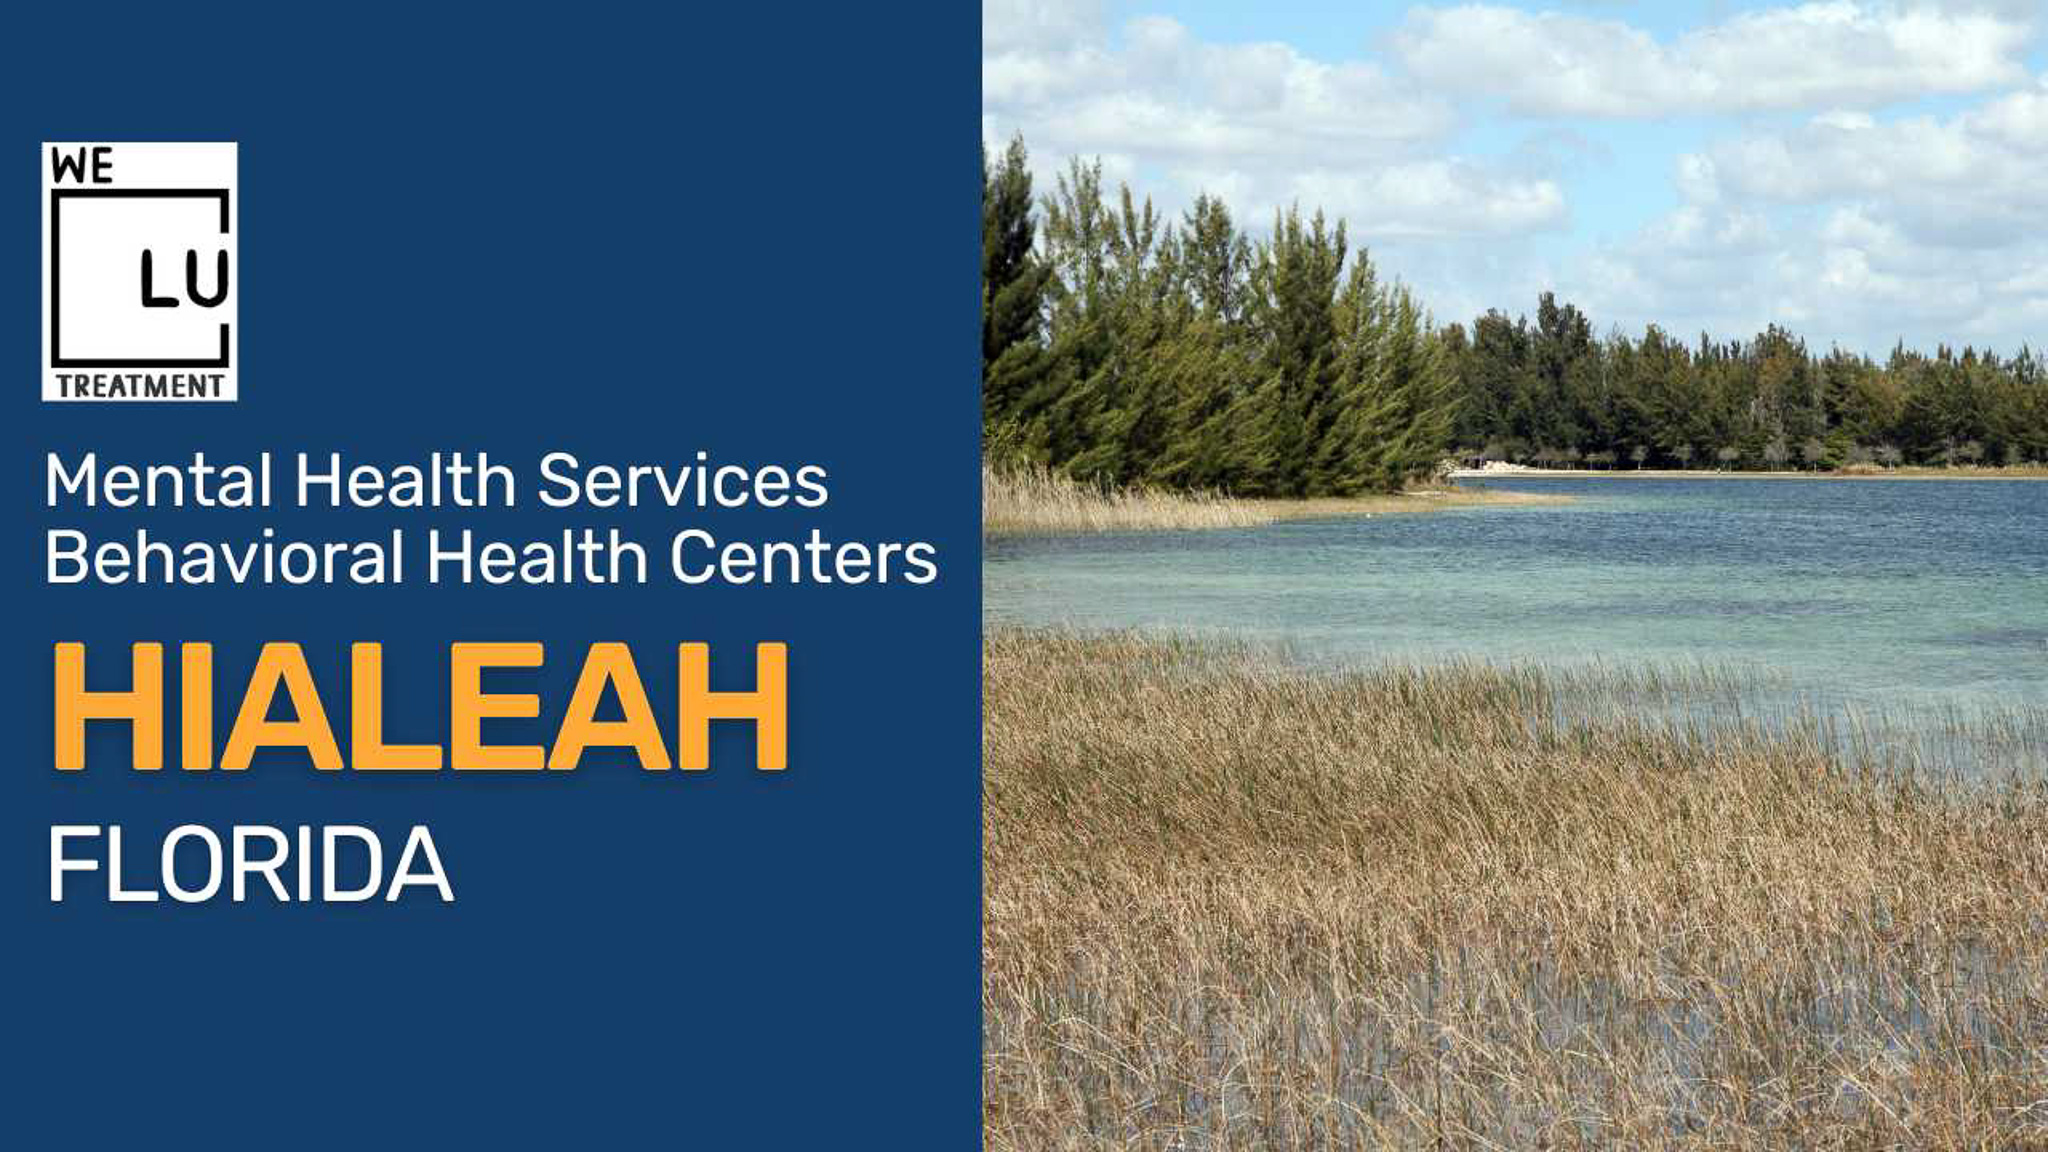 Hialeah FL (MH) We Level Up treatment center for drug and alcohol rehab detox and mental health services - Image 1